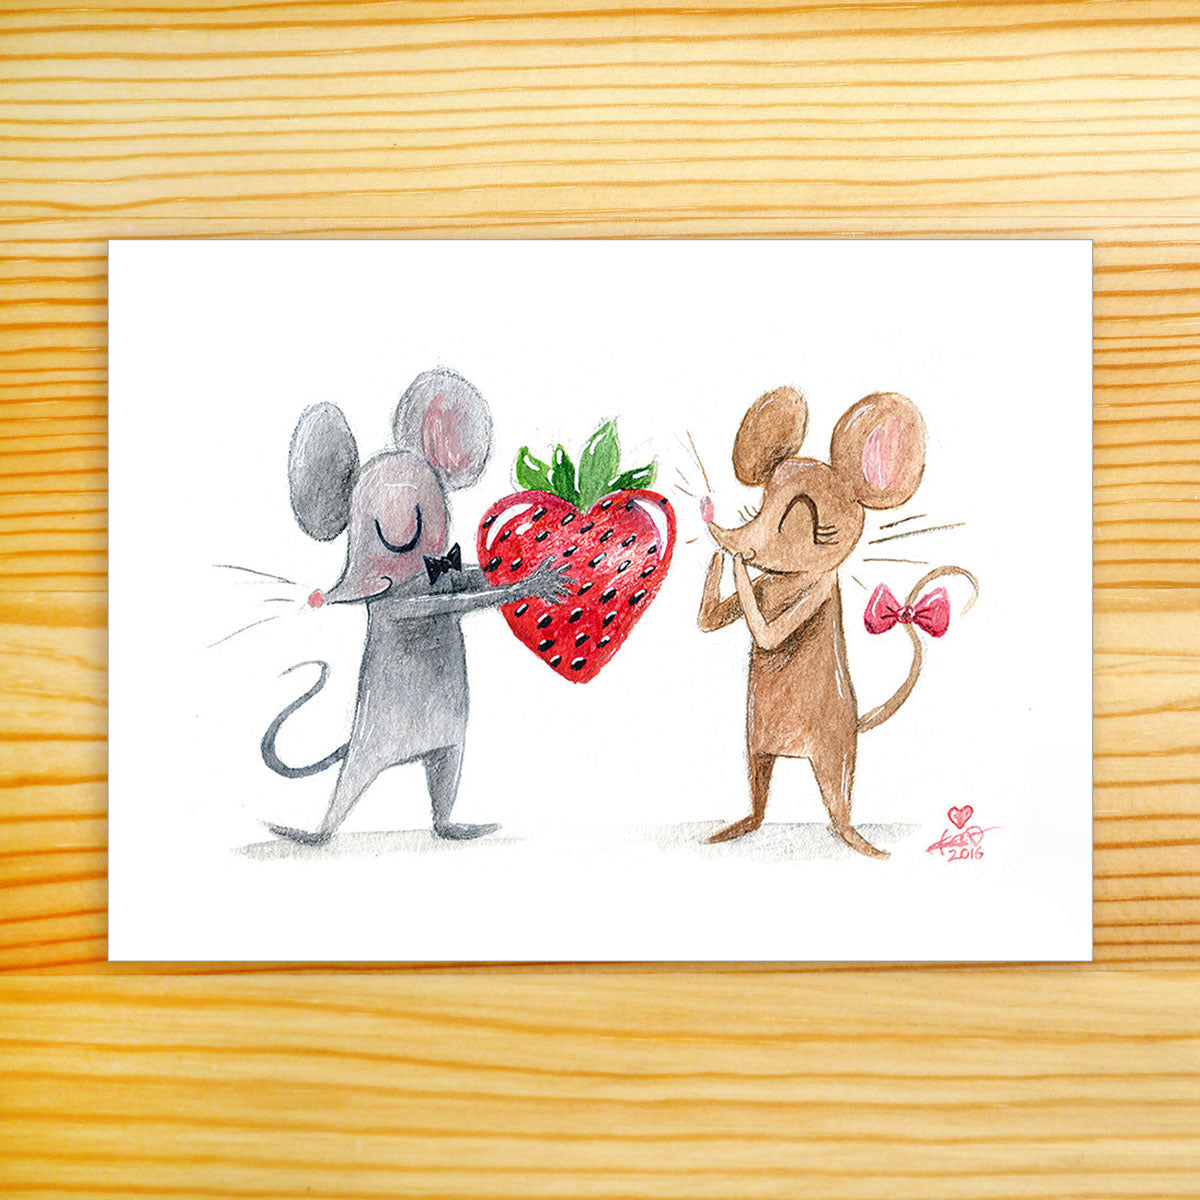 I Love You Berry Much - 5x7 Print